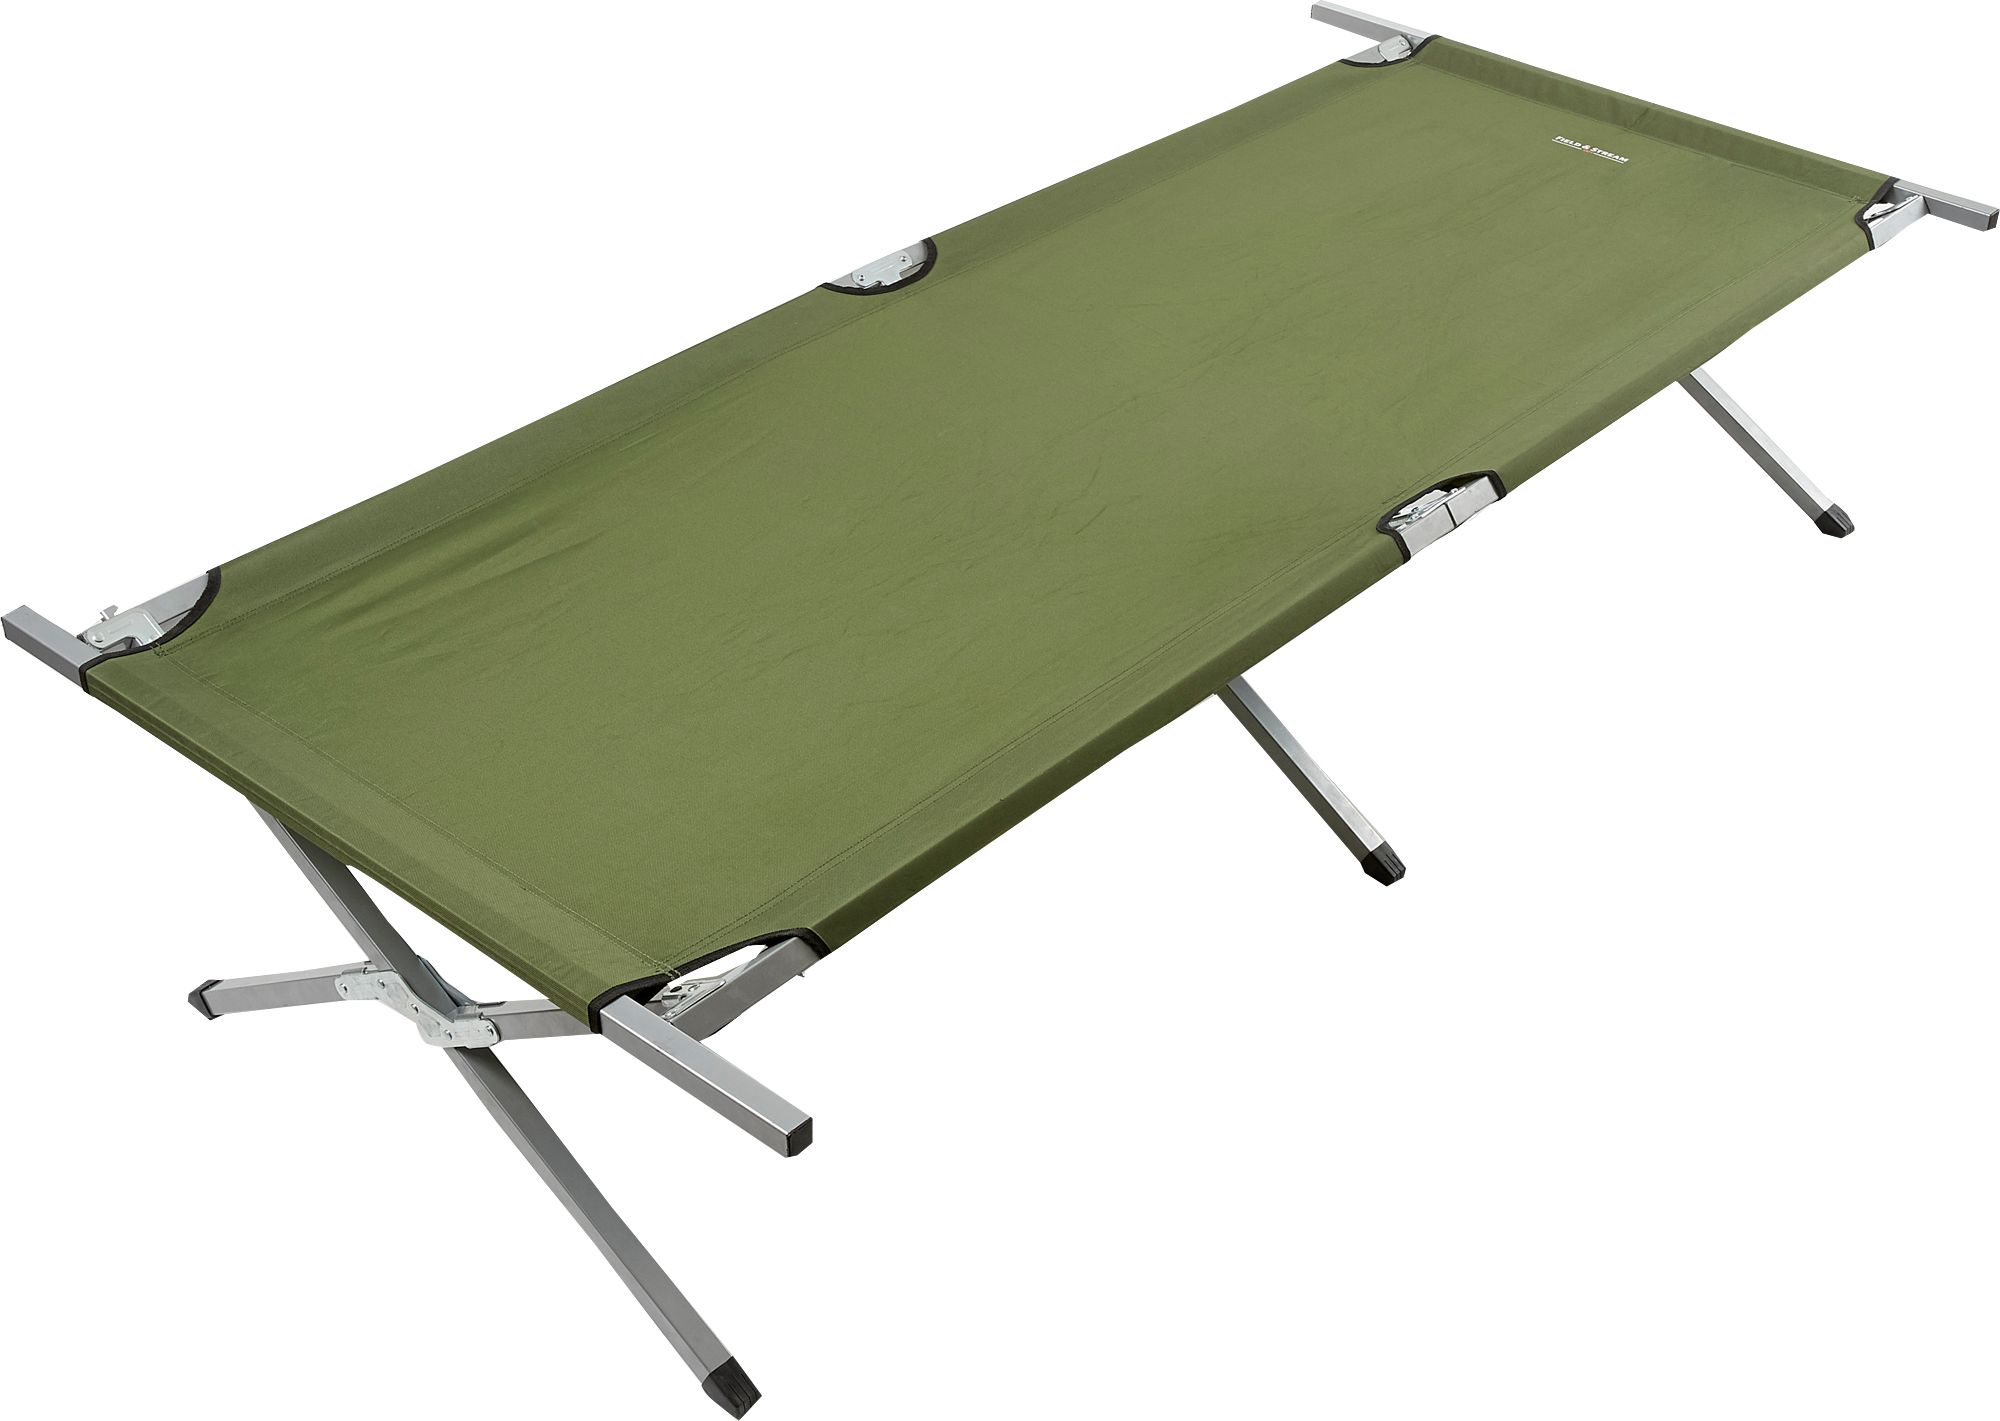 Camping Cots & Sleeping Cots | DICK'S Sporting Goods